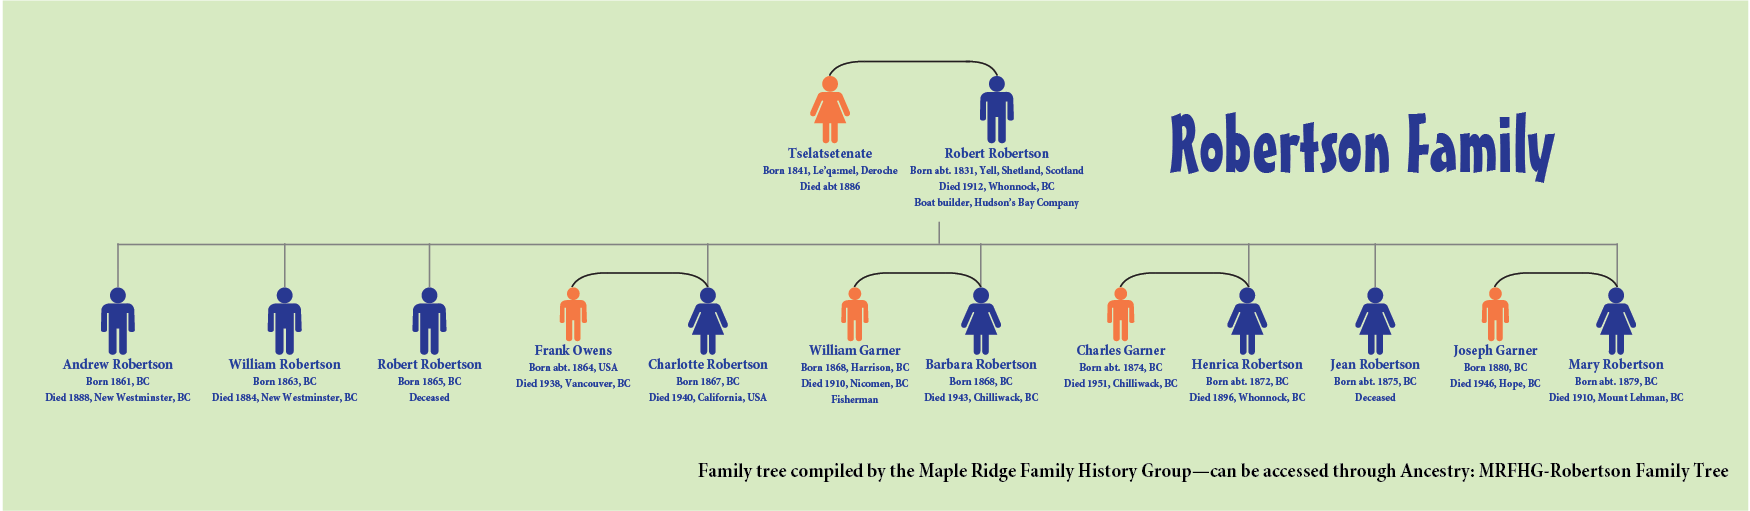 Robertson family tree compiled by the Maple Ridge Family History Group